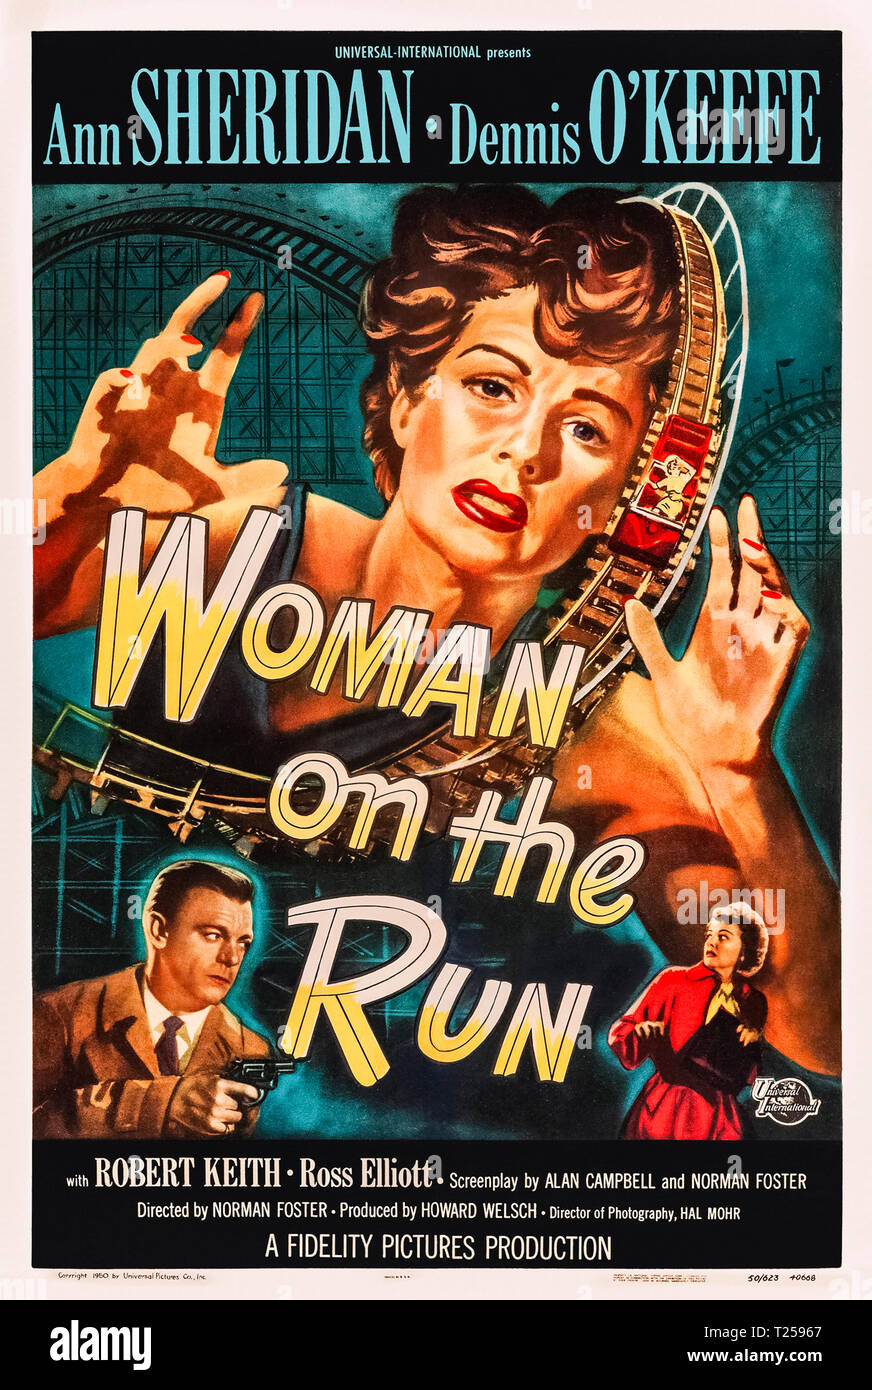 Woman on the Run (1950) directed by Norman Foster and starring Ann Sheridan, Dennis O'Keefe and Robert Keith. Classic film noir about a murder eyewitness on the run in San Francisco. Stock Photo